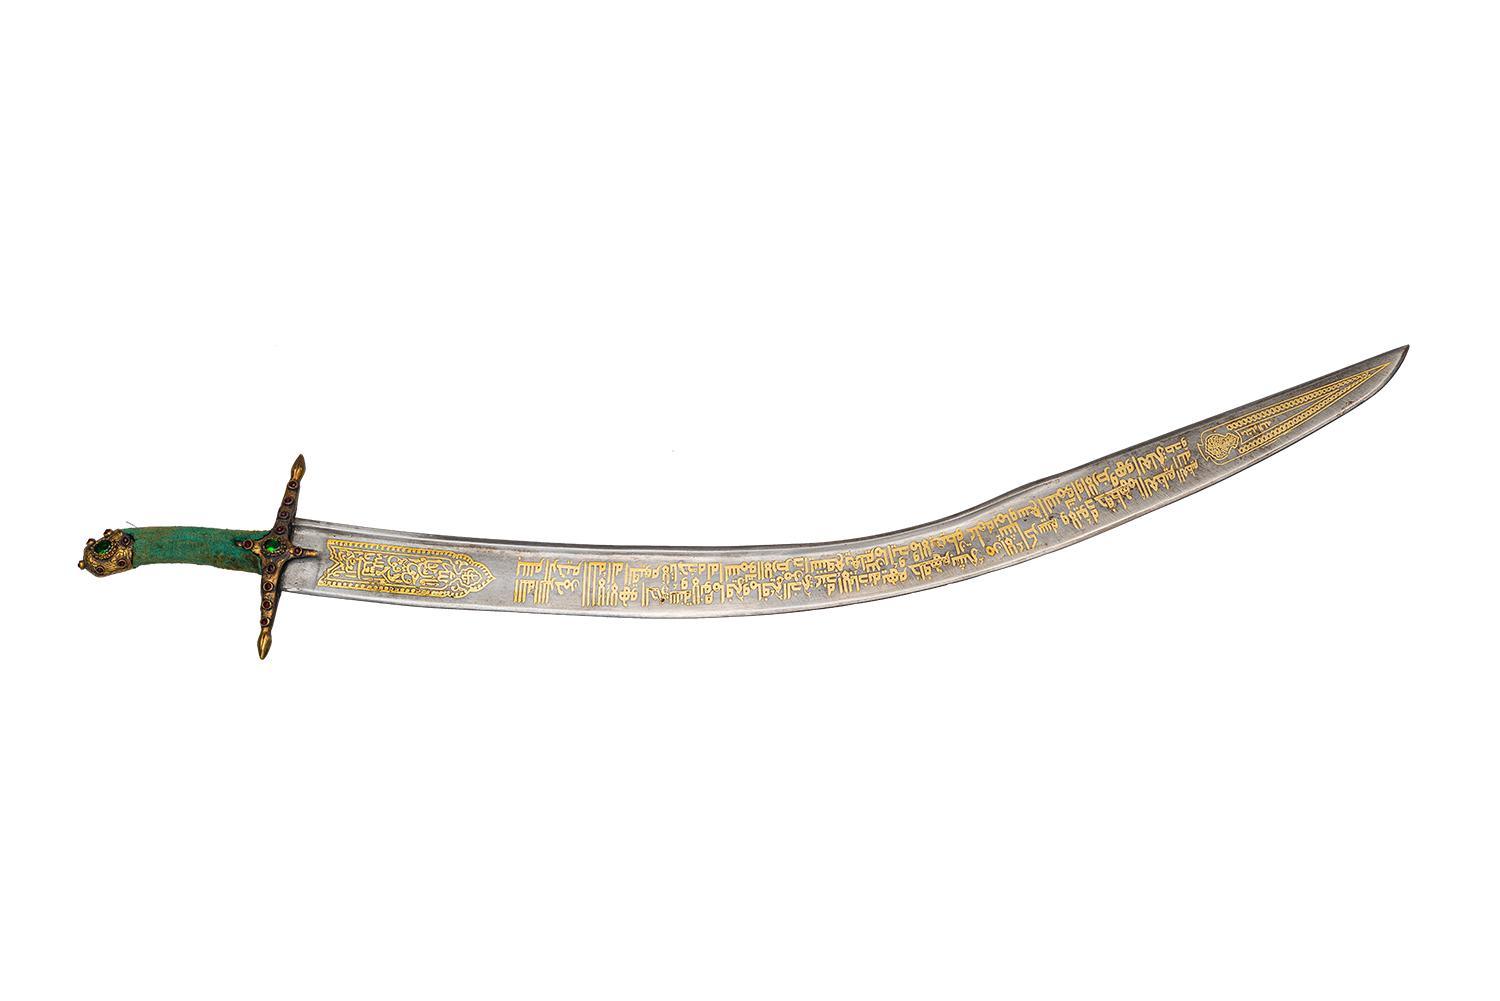 Brass Engrave Kilij Sword With inlaid Stone Scabbard (2)